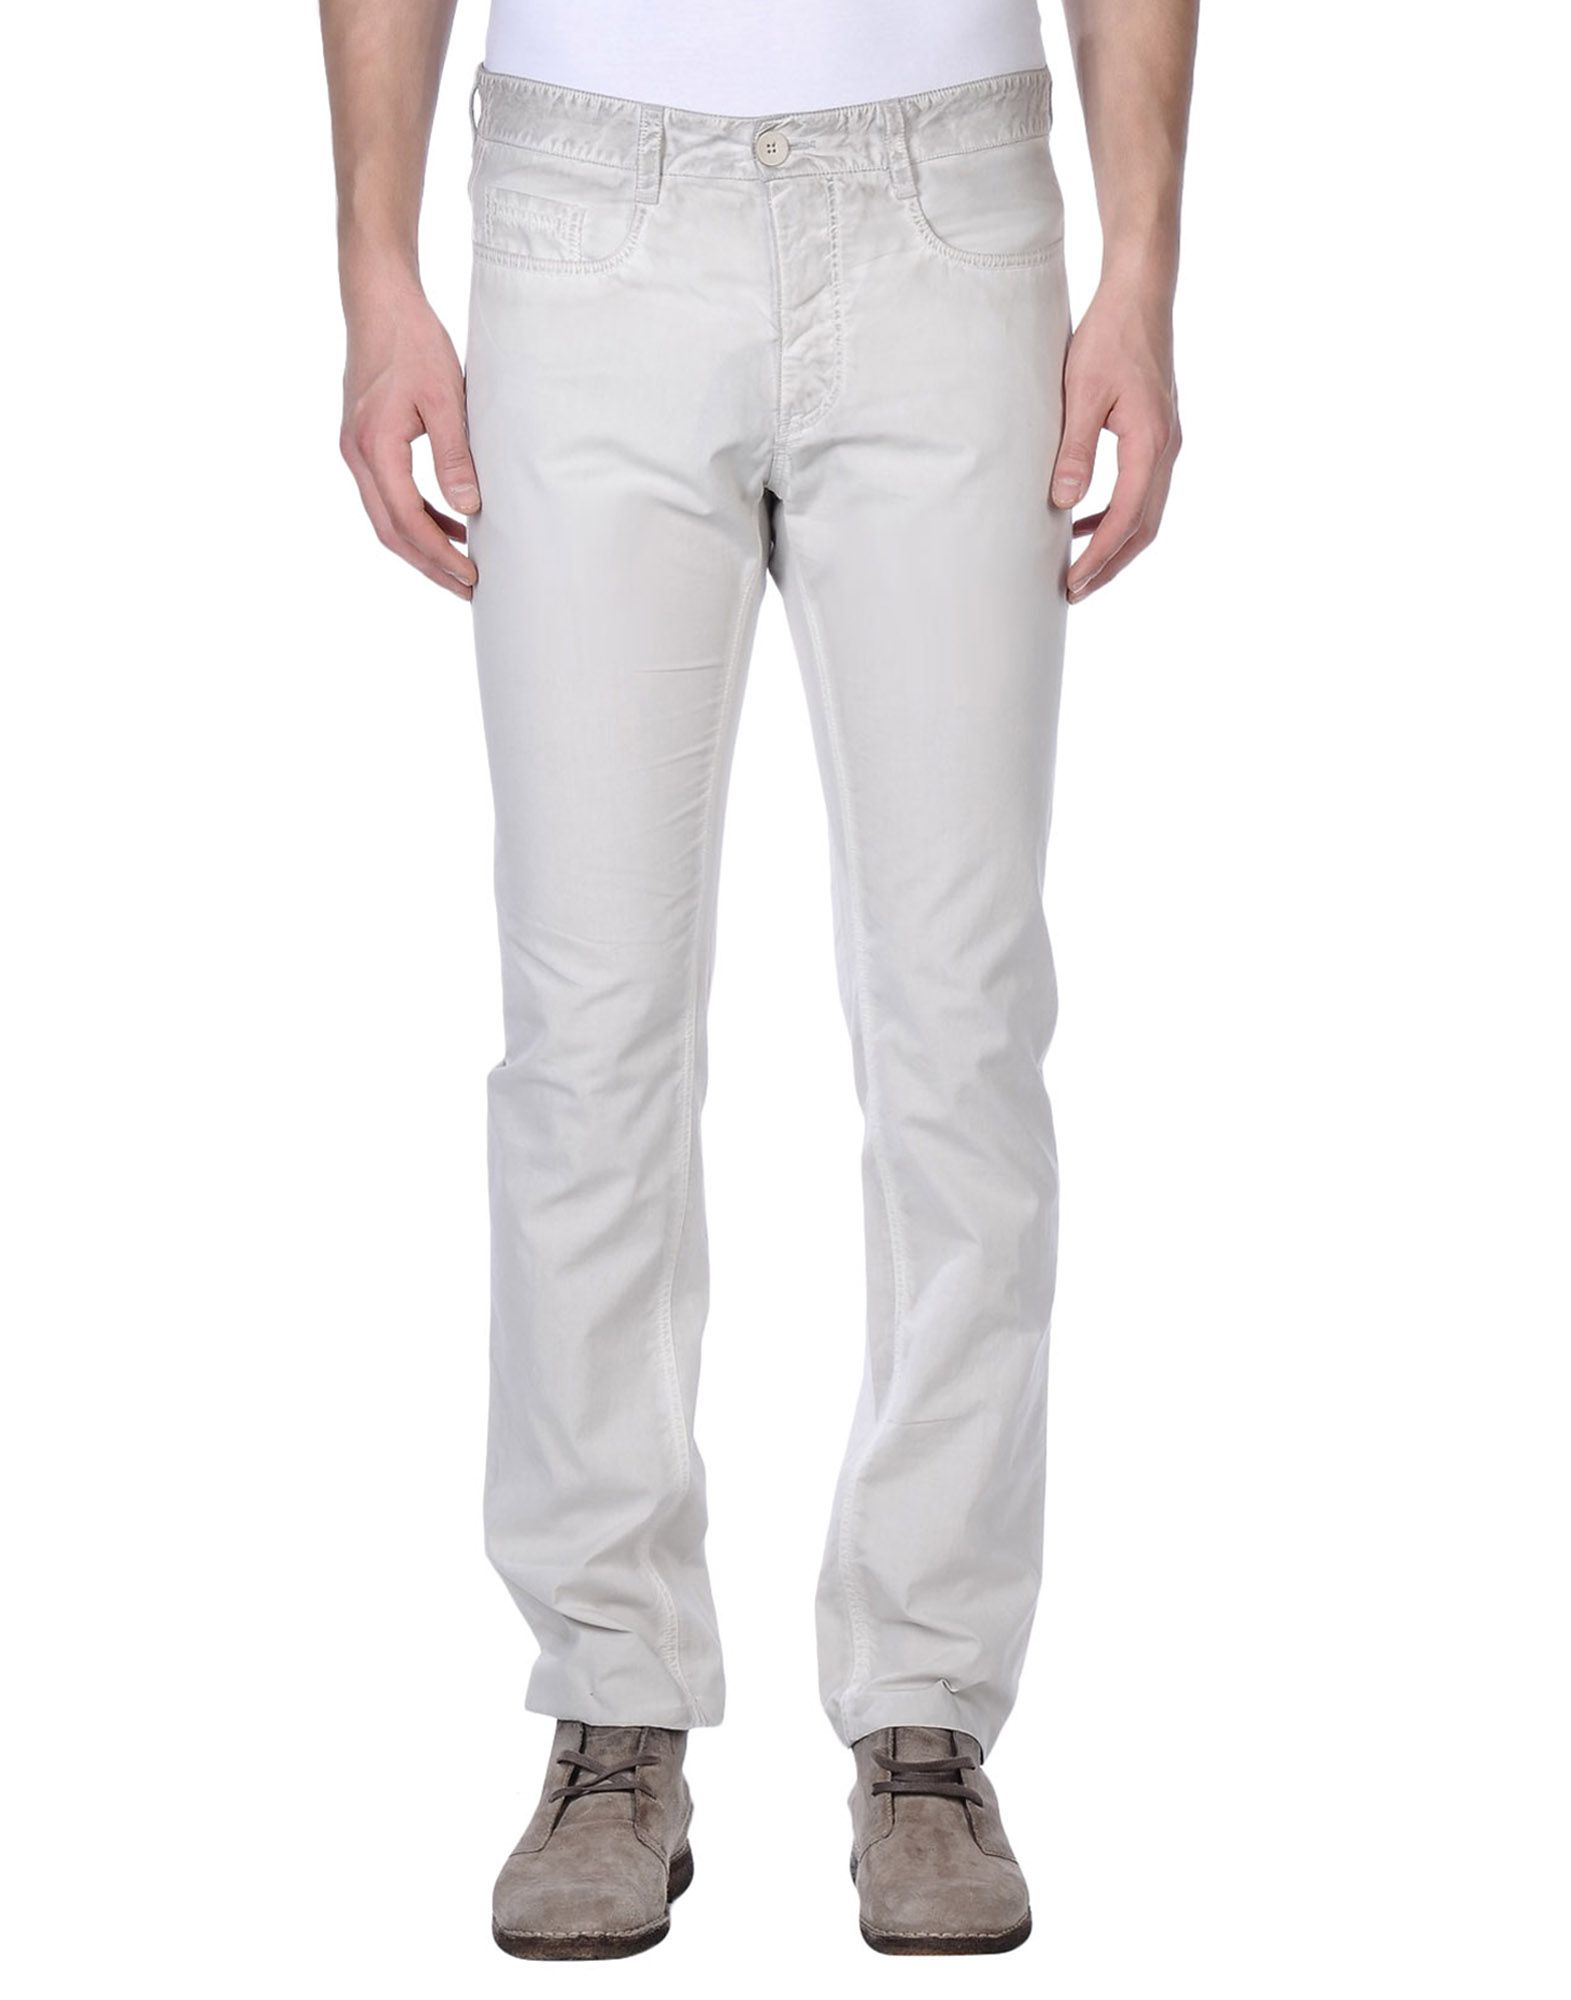 Transit Casual Pants in White for Men - Lyst